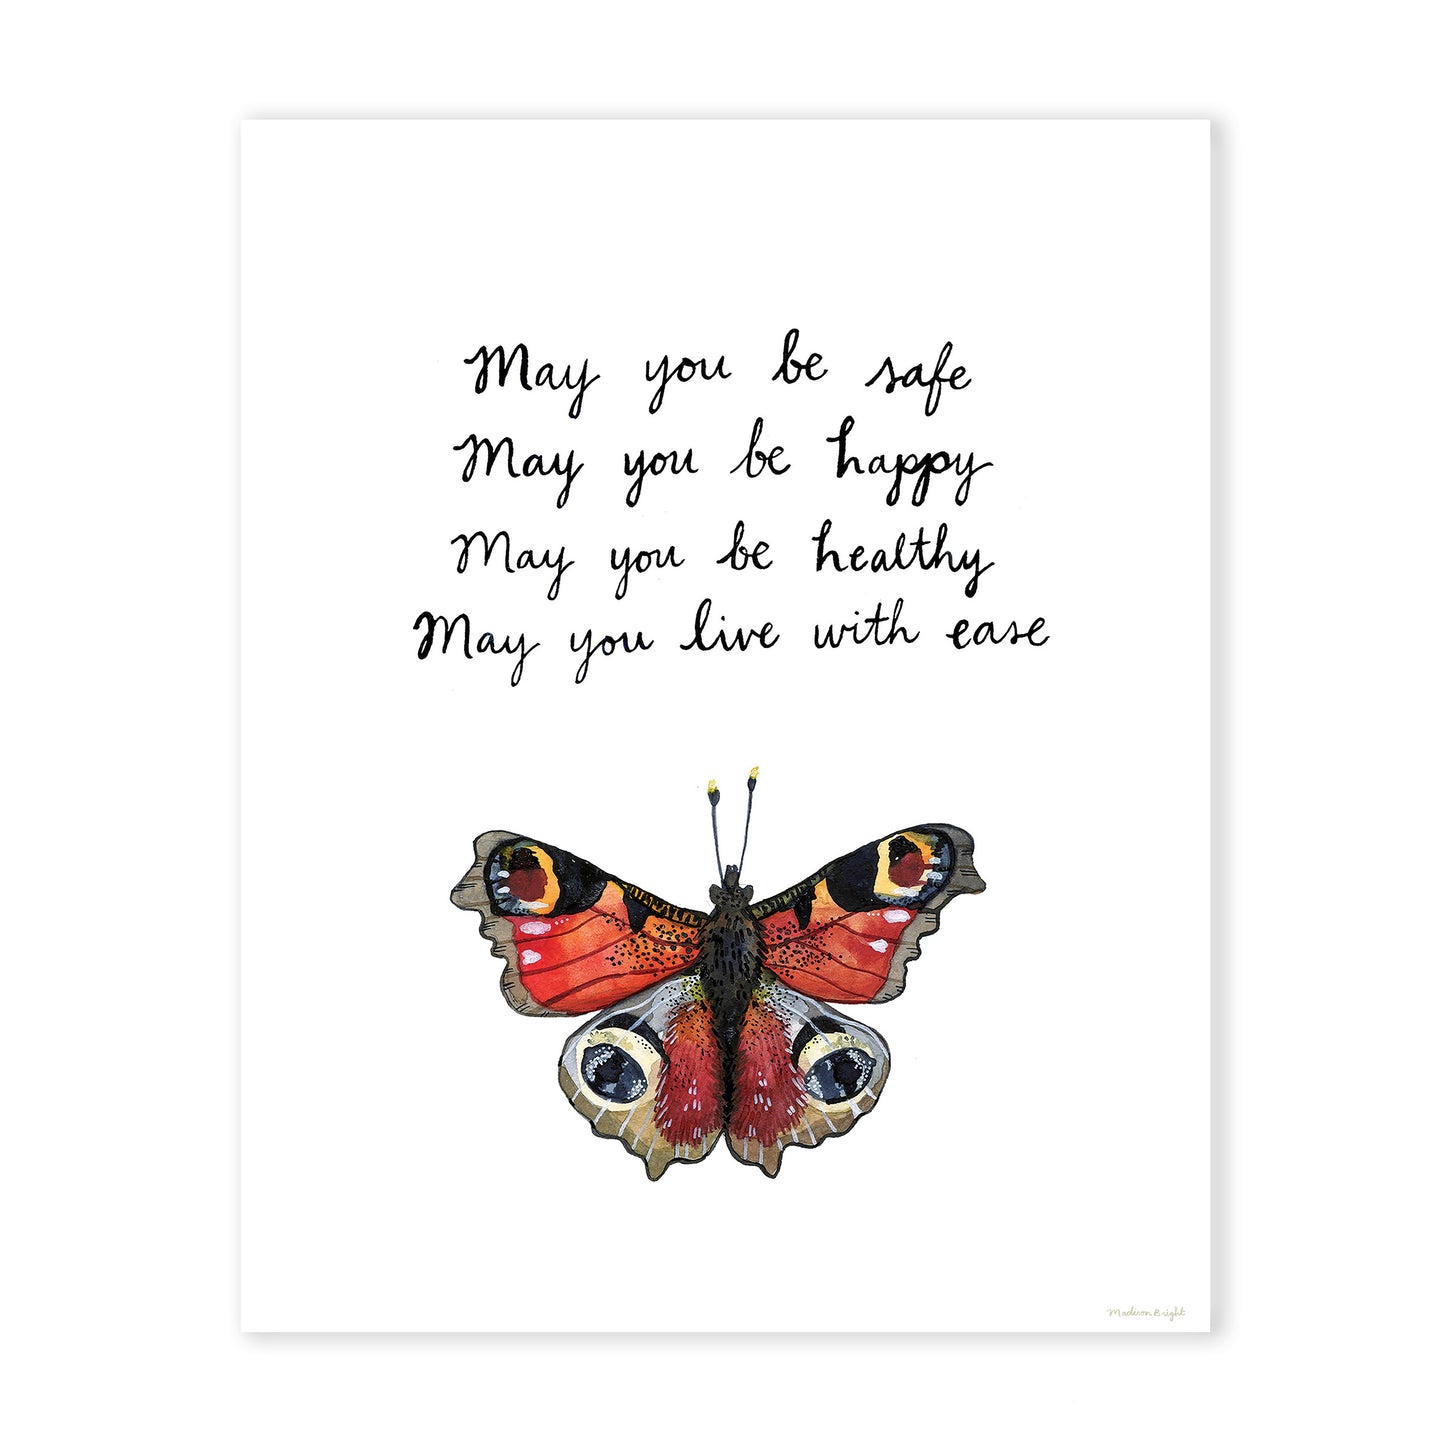 May You and May I Be Safe, Happy, Healthy - Lovingkindness - Set of Two Art Prints